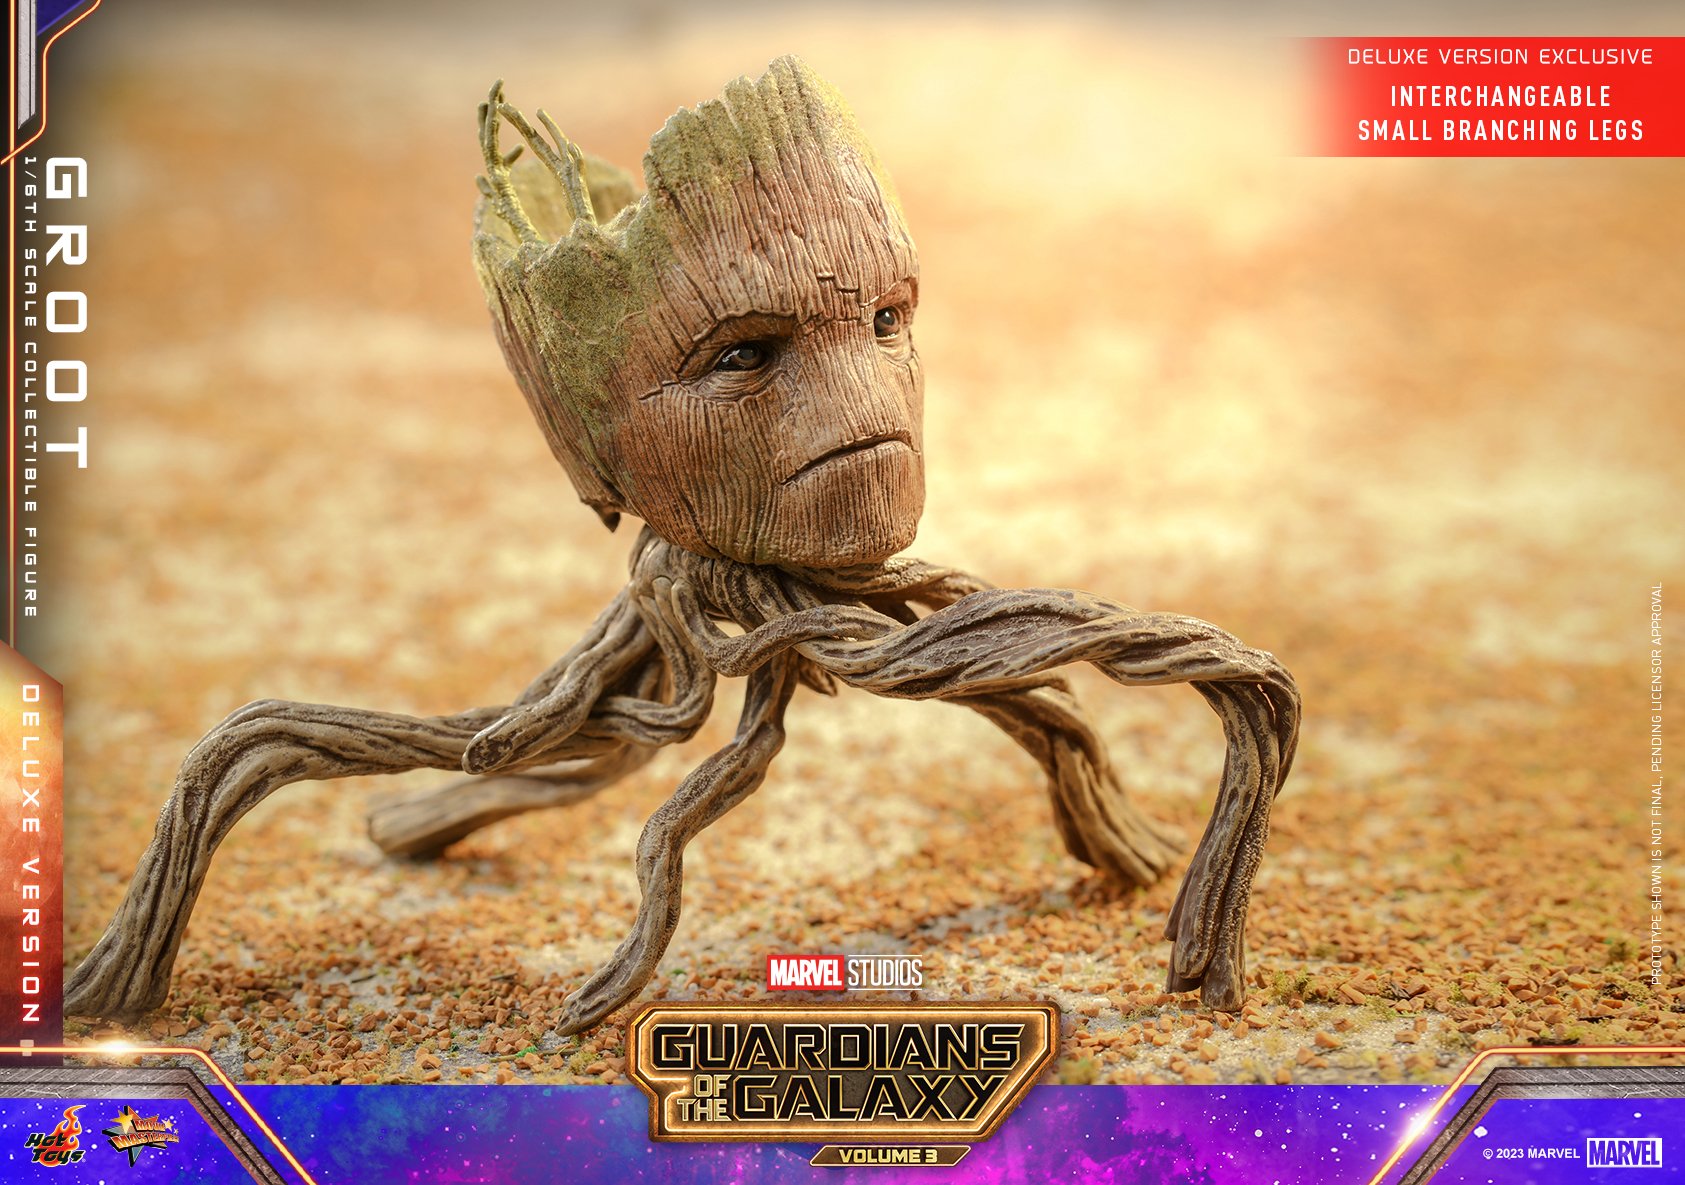 Hot-Toys-GotG3-Groot-Deluxe-004.jpeg